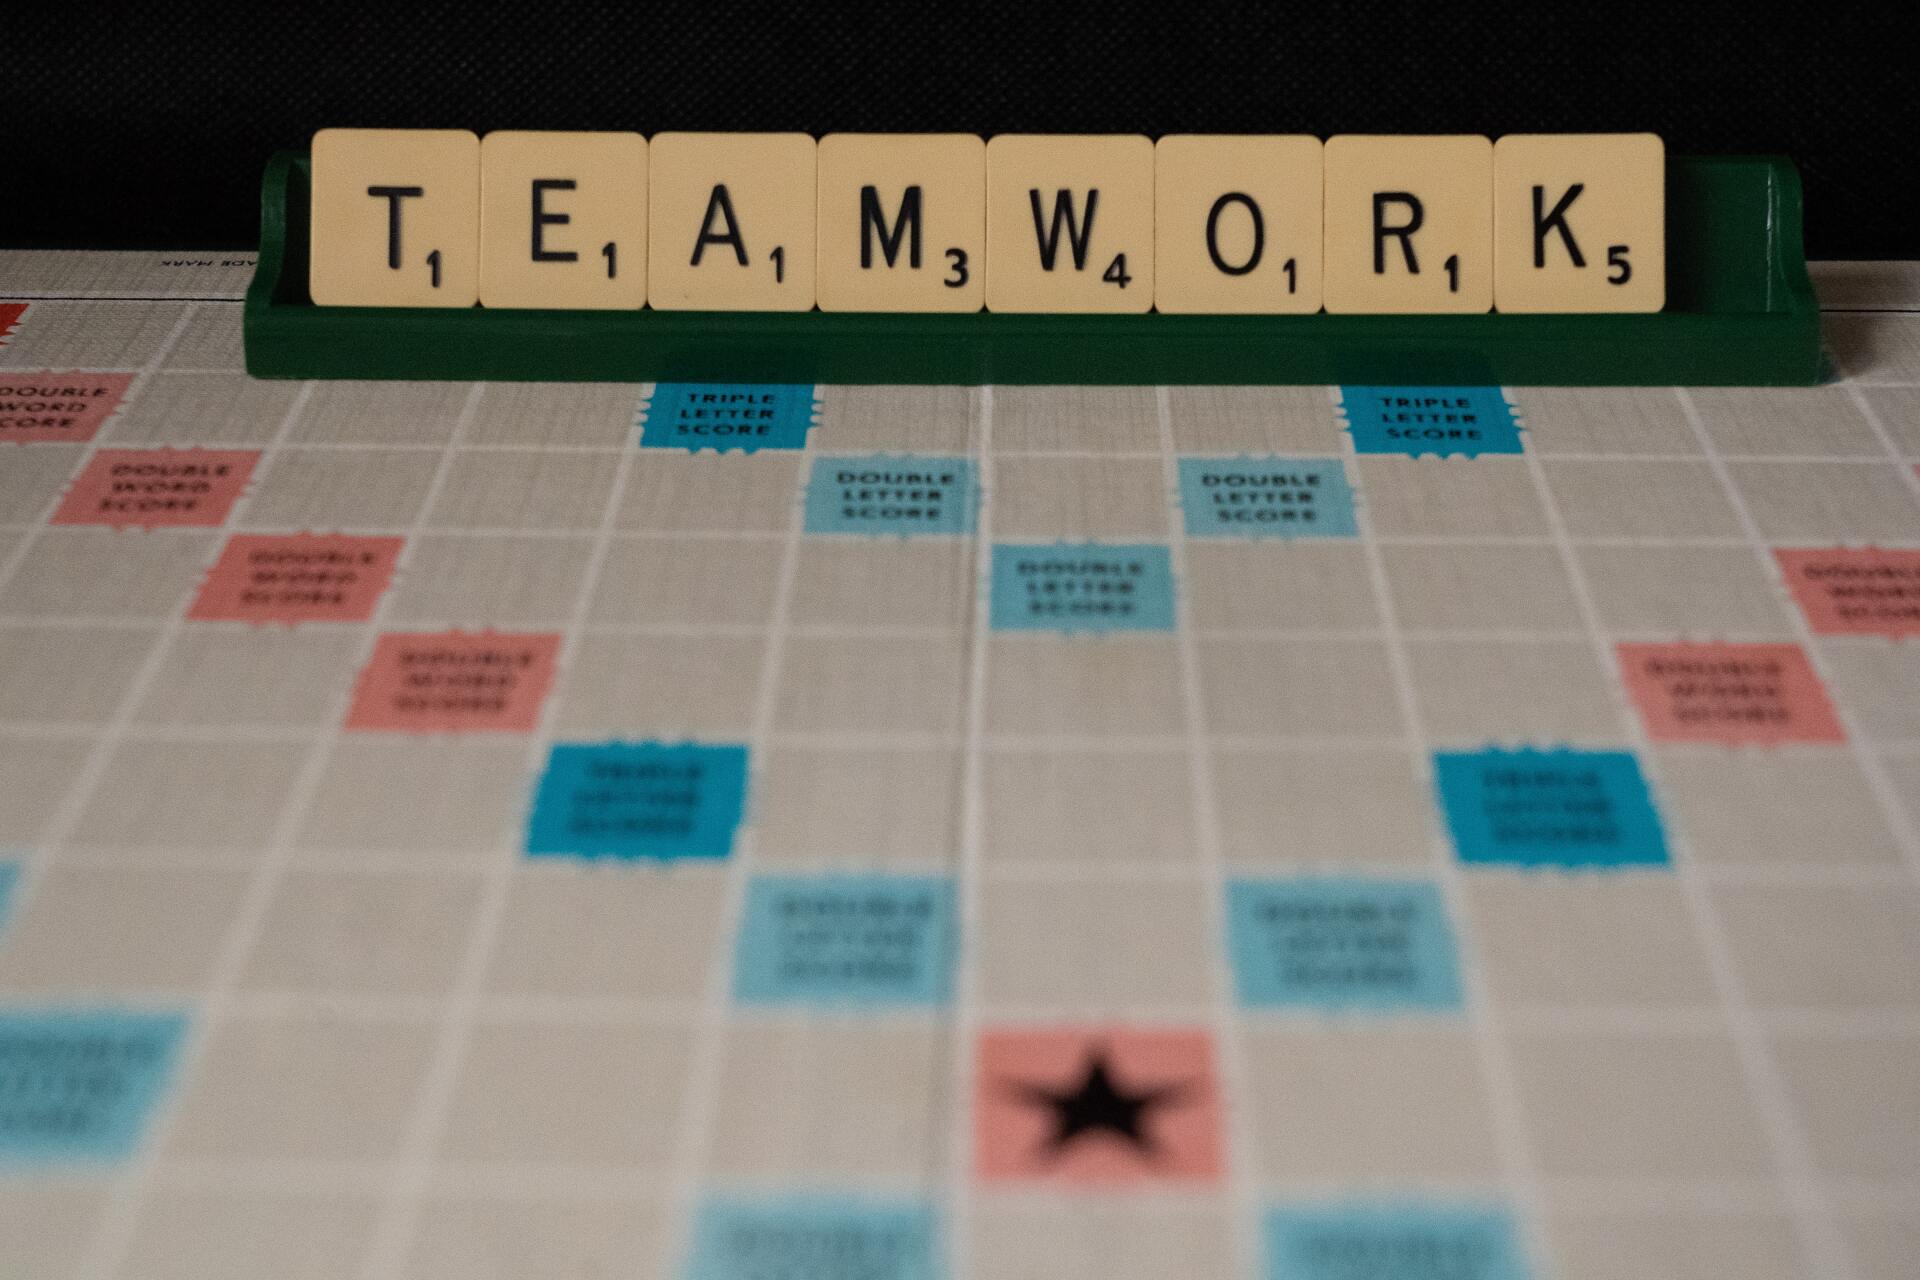 Teamwork spelled out in a scrabble game